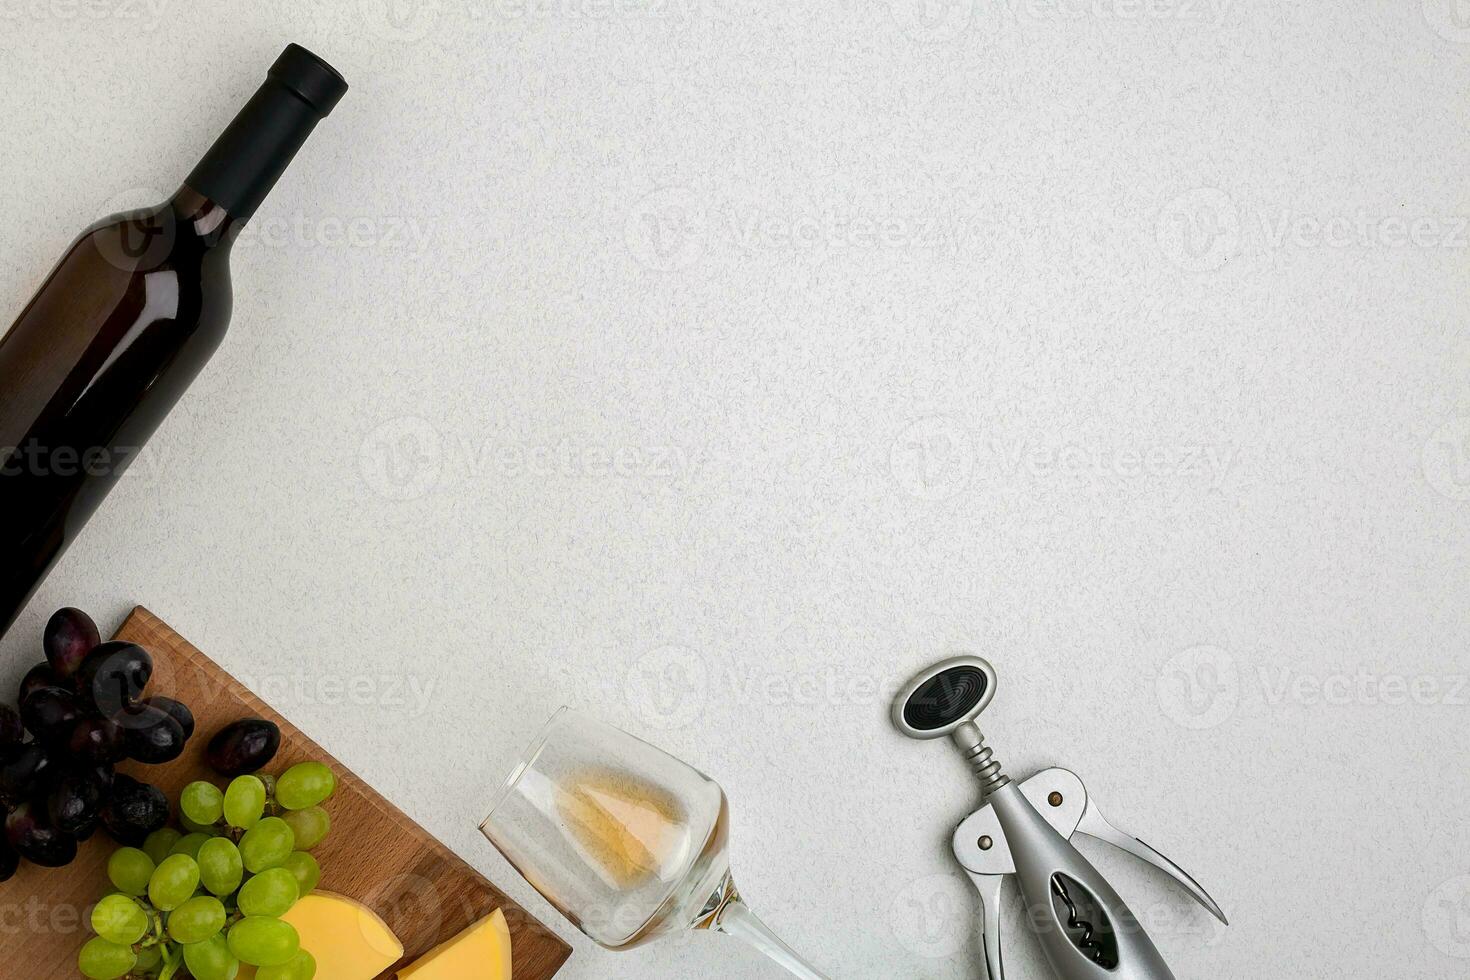 Wine, glasses and corkscrew over white background. Top view photo